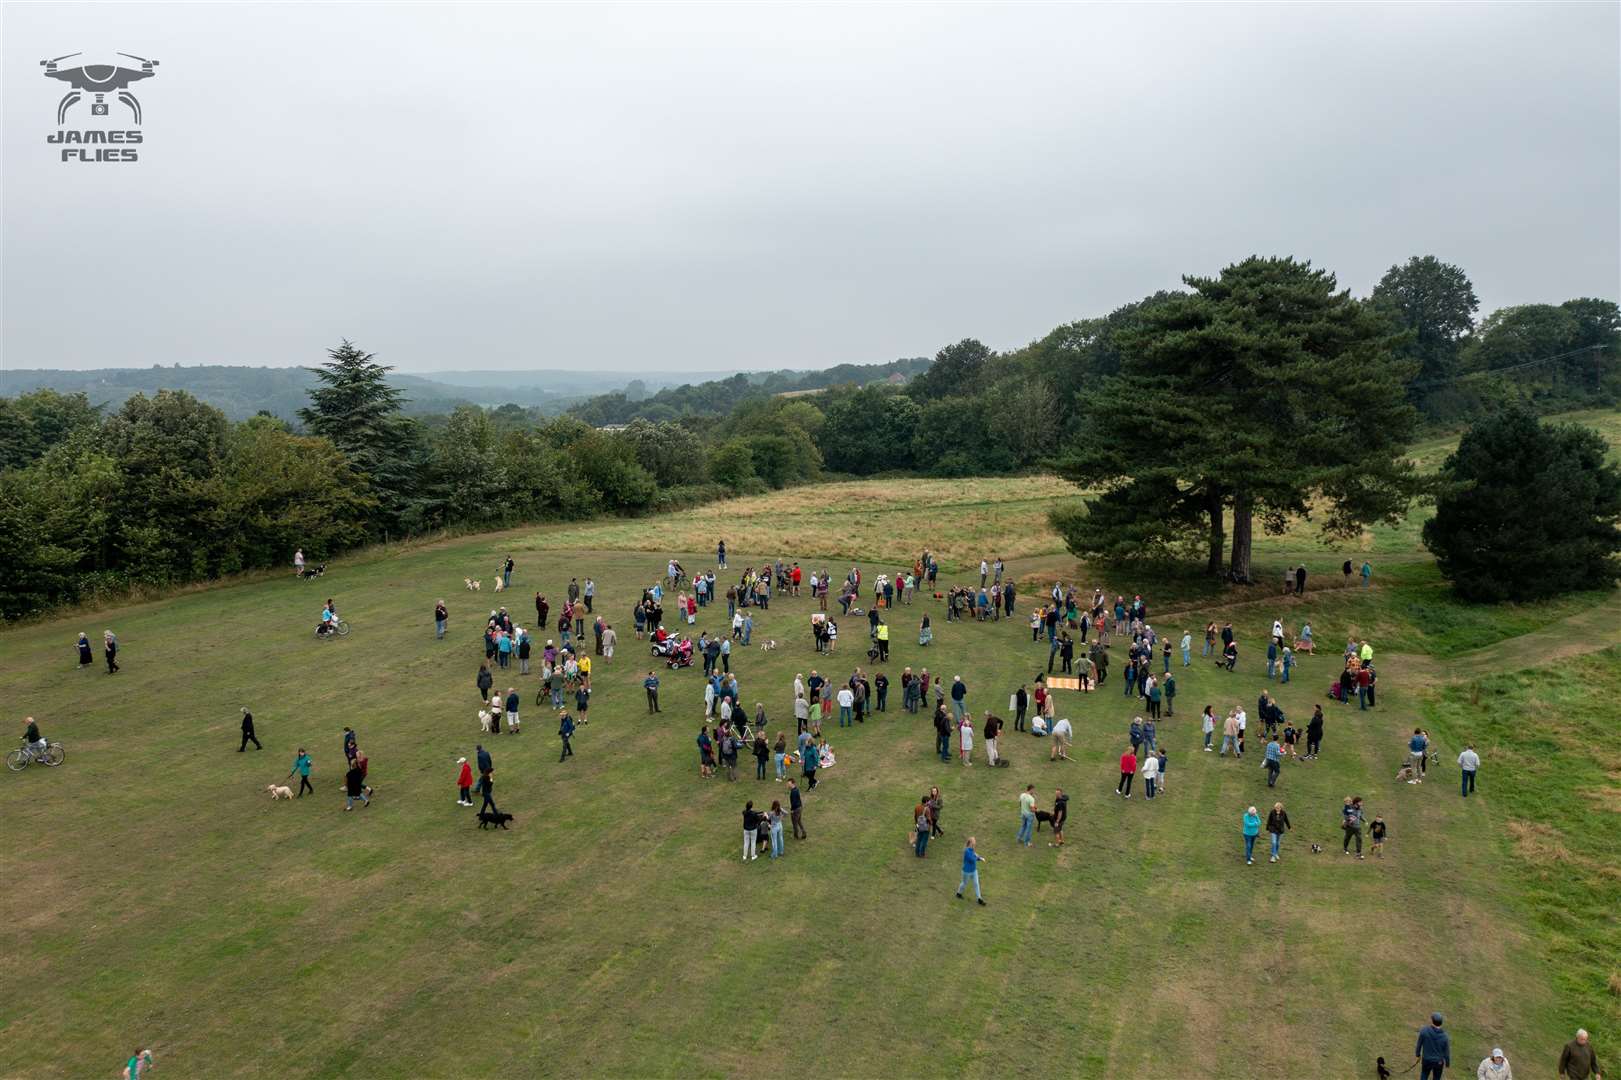 The meadow is a favourite walking spot. Photo: James Flies from Aerial Solutions